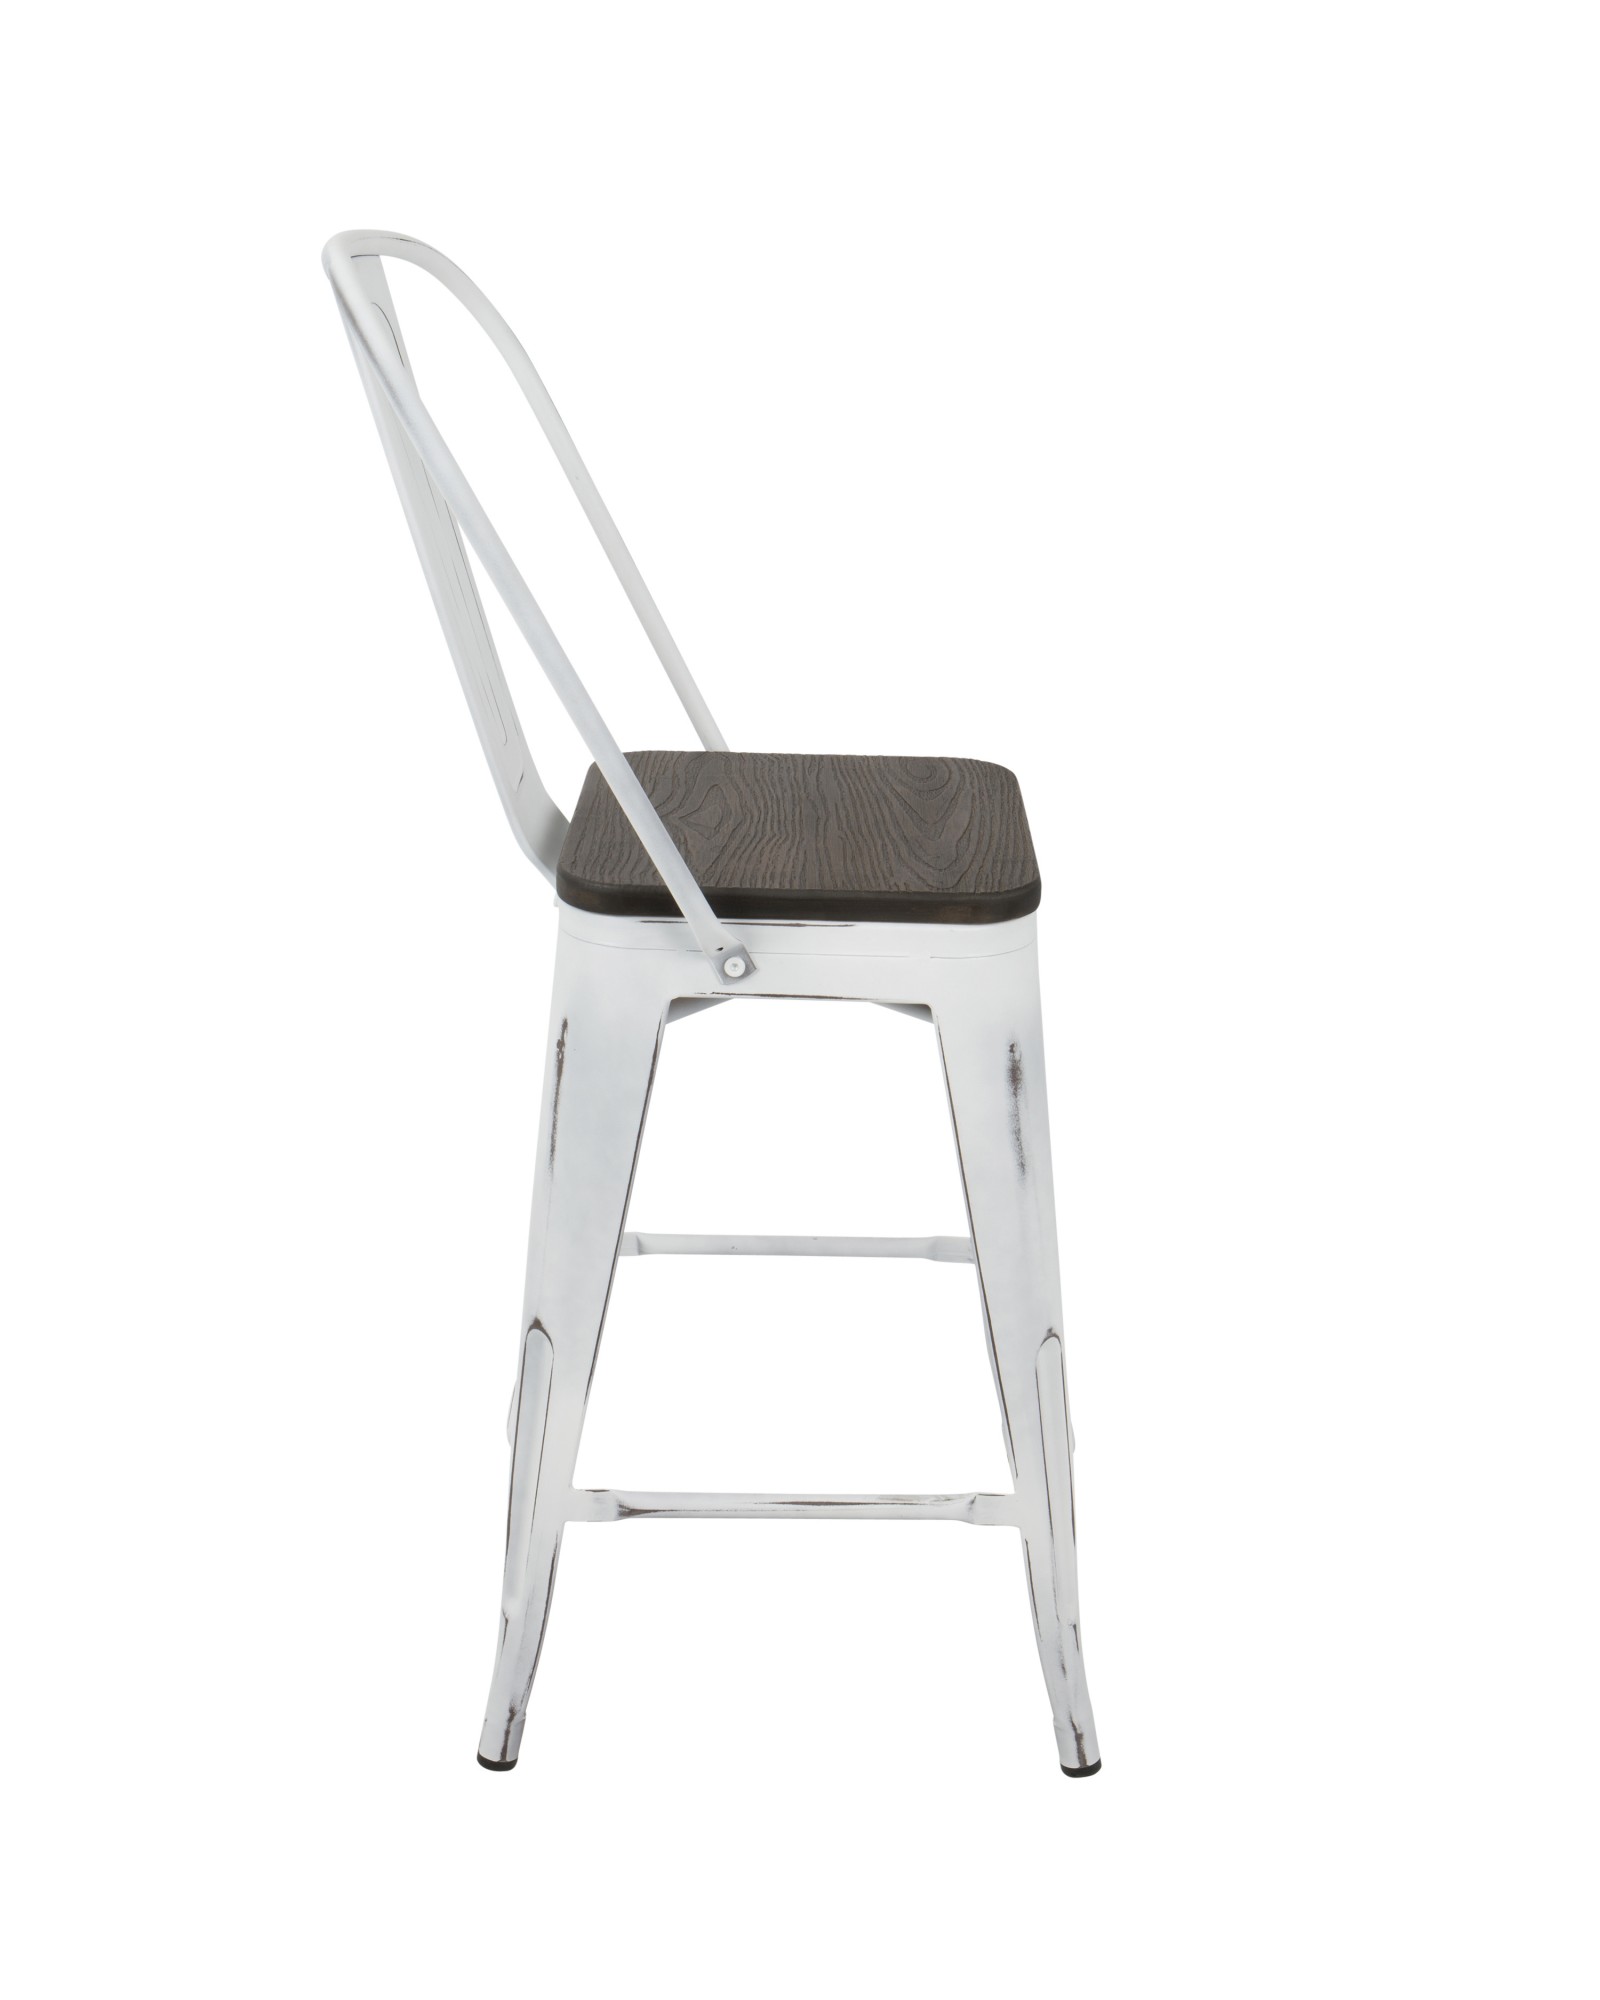 Oregon Industrial High Back Counter Stool in Vintage White and Espresso - Set of 2